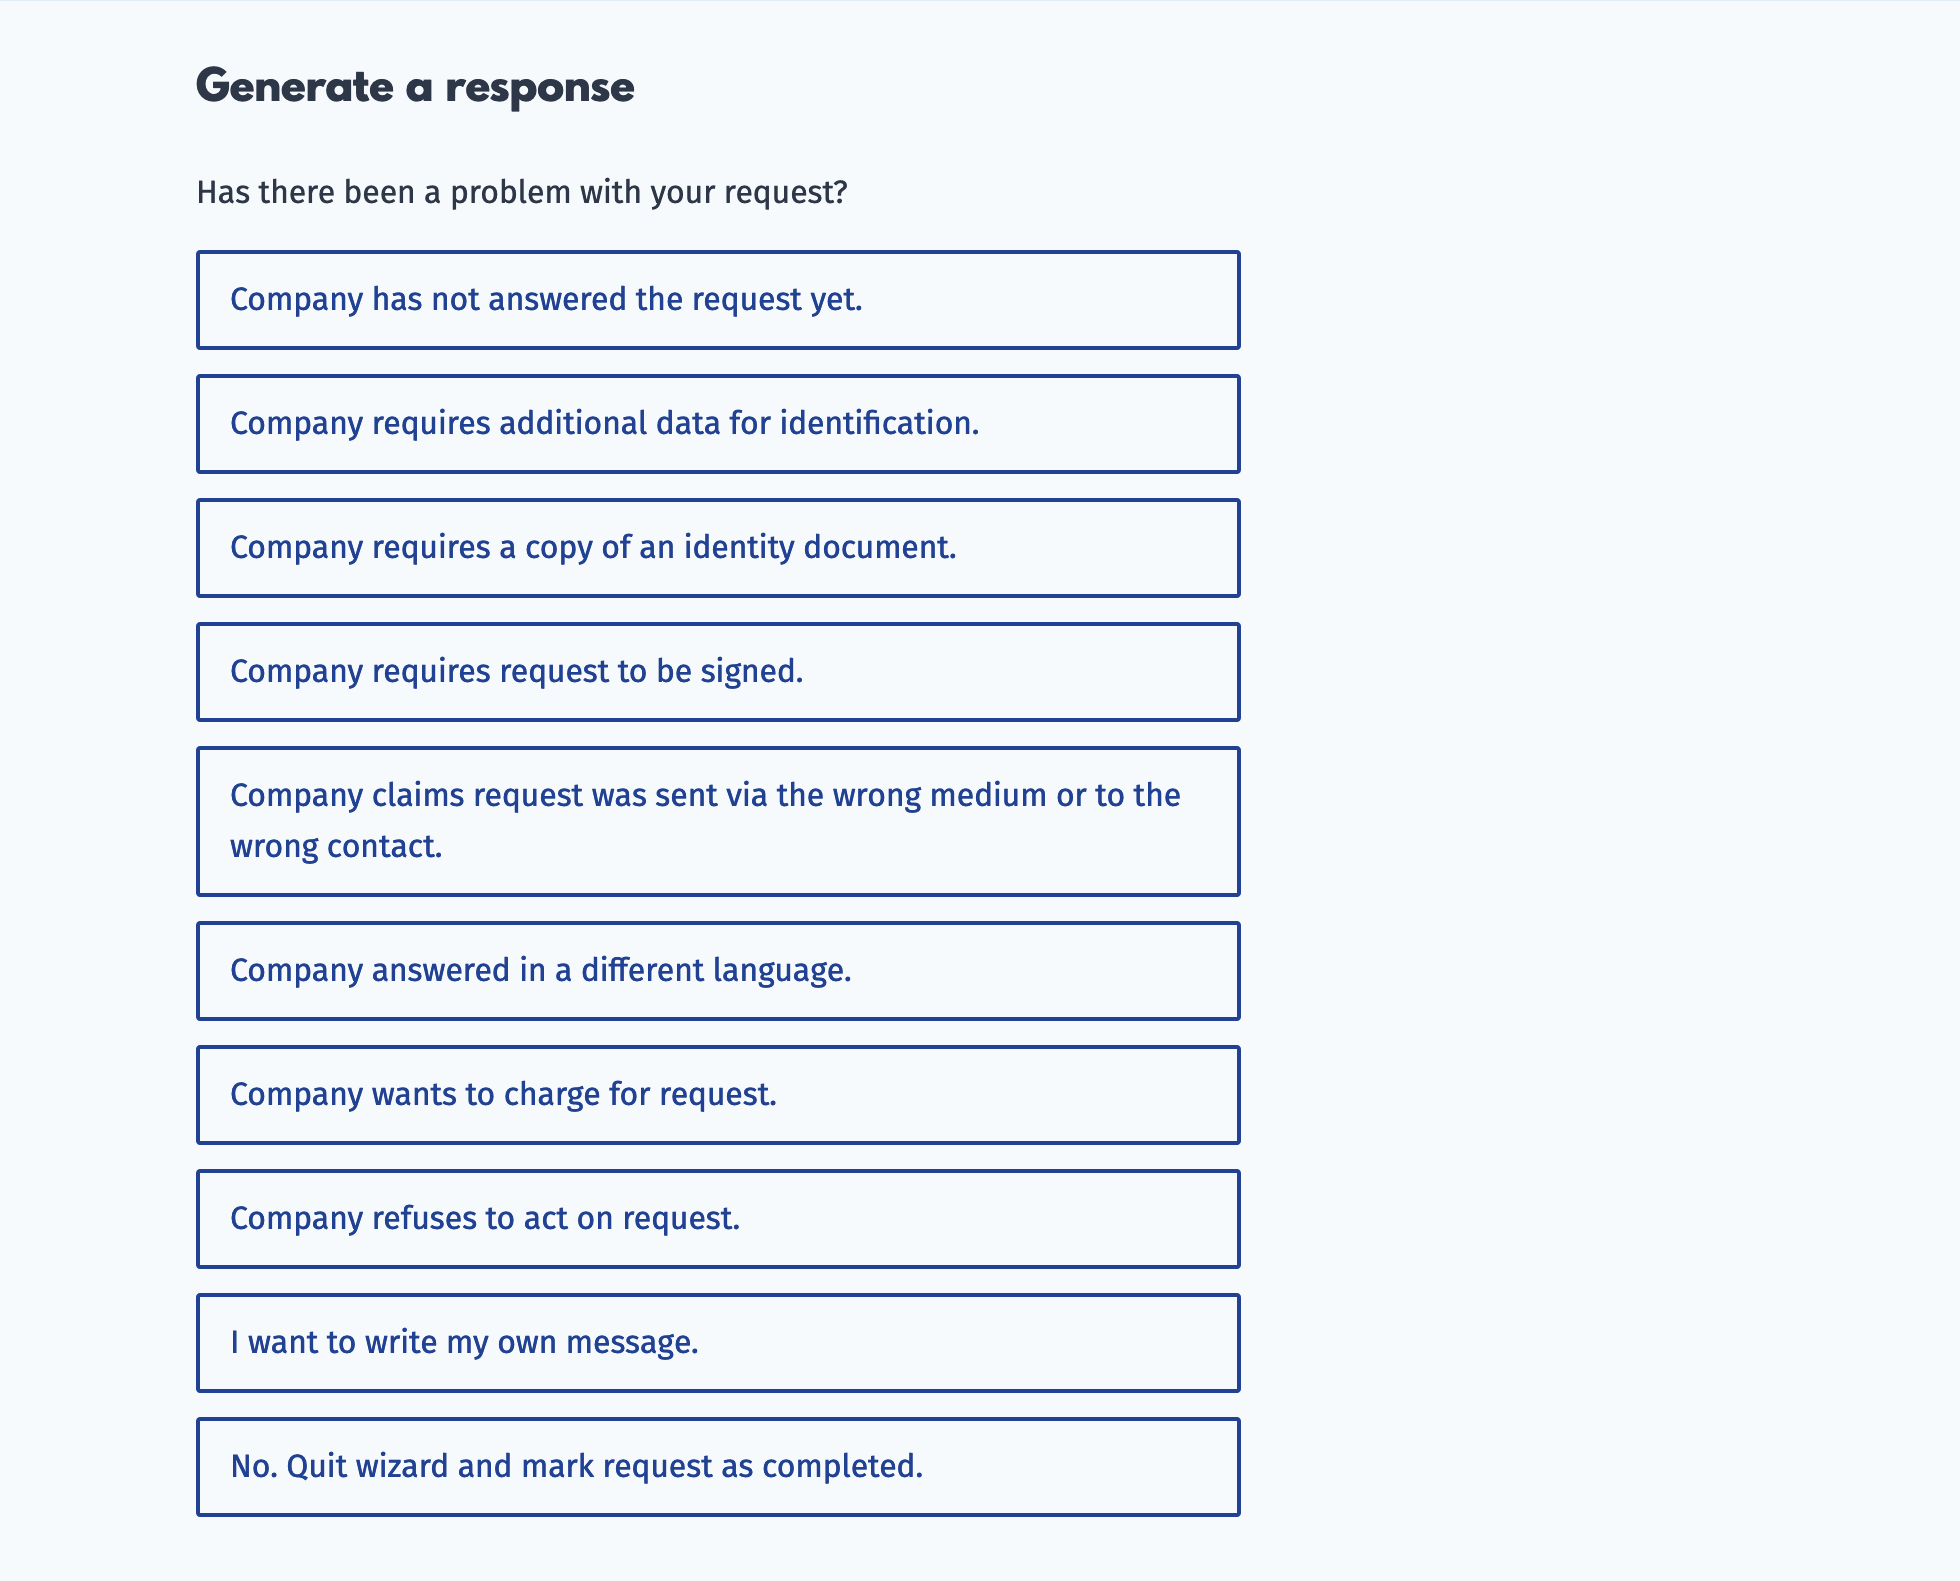 Screenshot of the admonition generator. On top, it shows the question “Has there been a problem with your request?” and below that are several buttons featuring different kinds of problems. One example of a button text: “Company has not answered yet.”